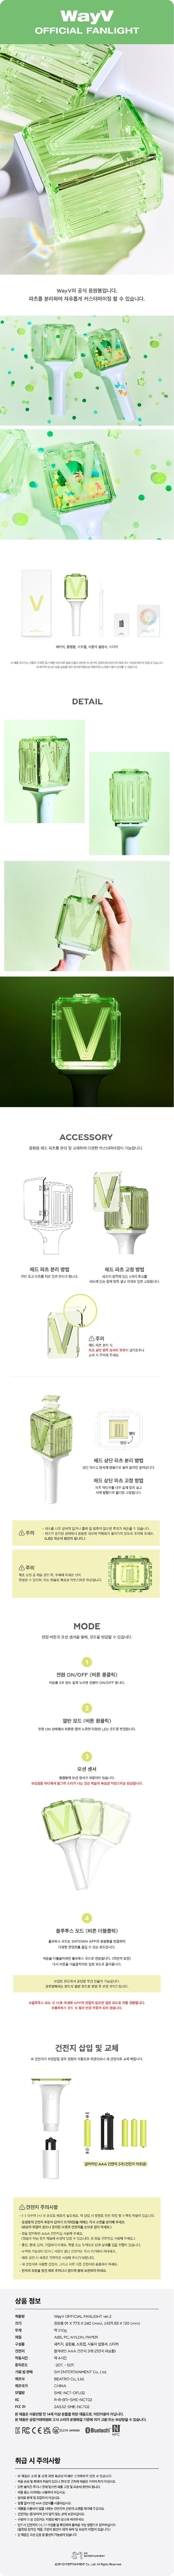 [PRE-ORDER ONLY] NCT OFFICIAL LIGHT STICK VER.2 (WayV VER.)